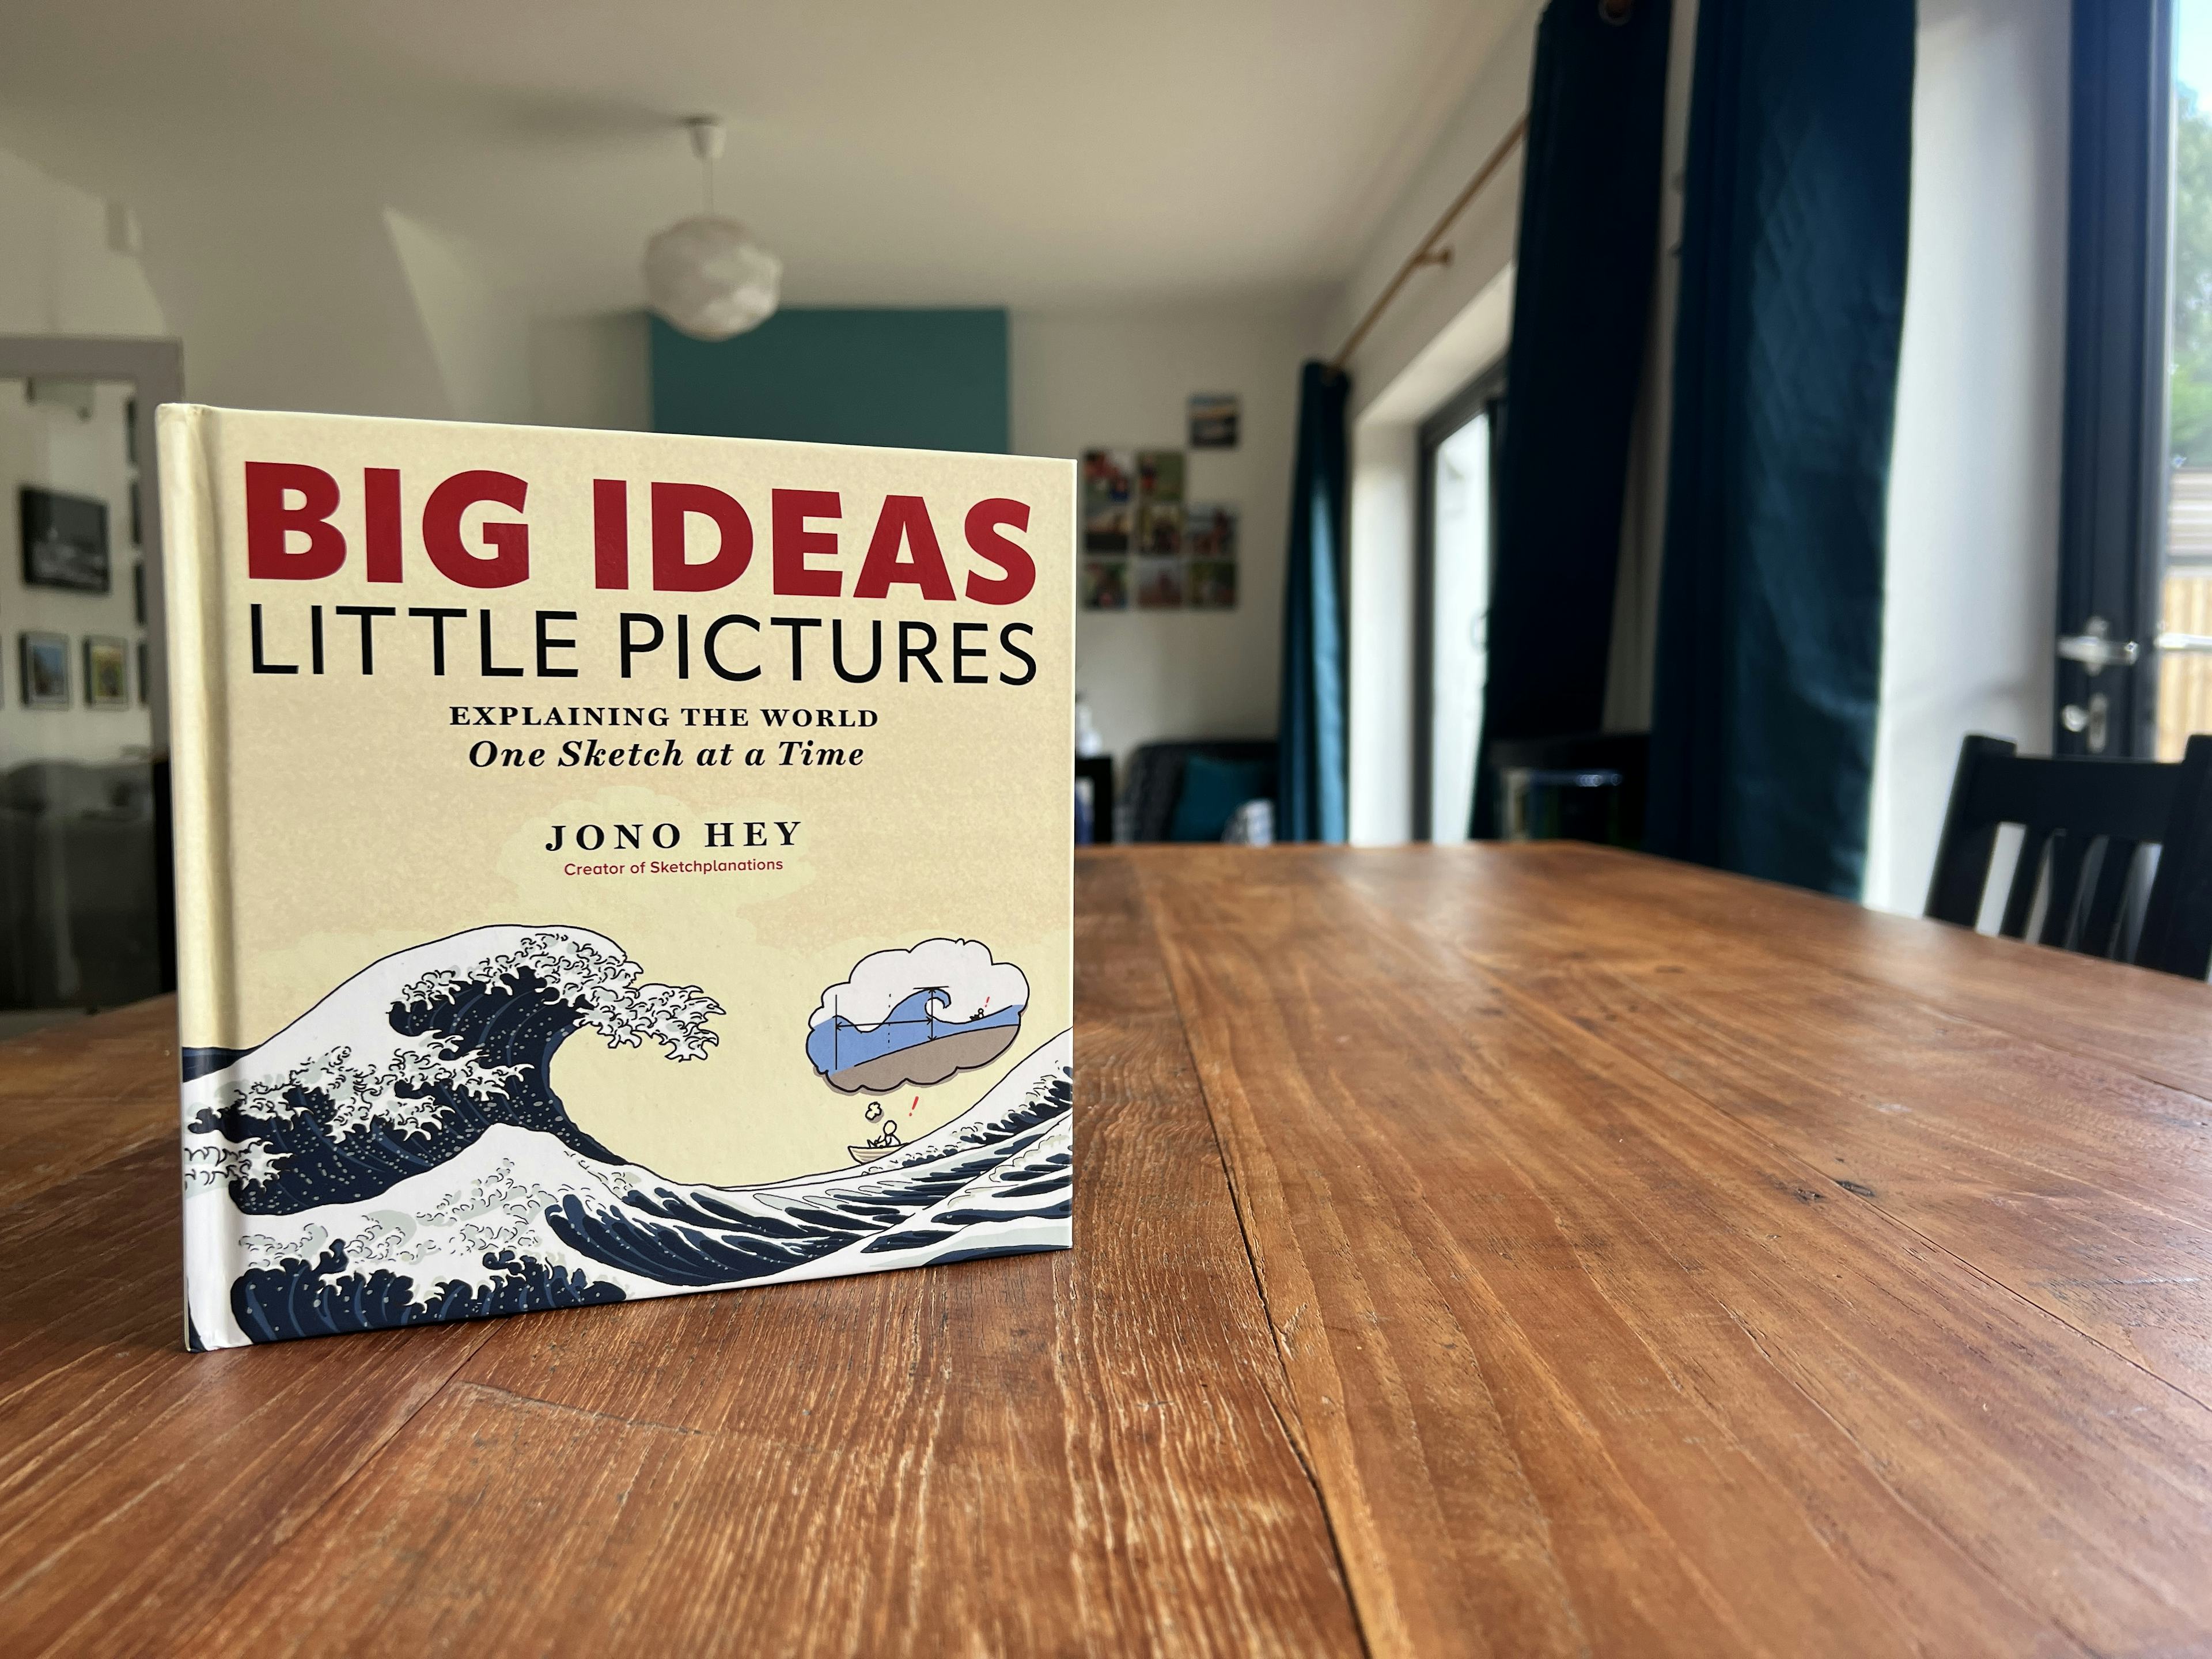 Big Ideas Little Pictures book on a wooden table